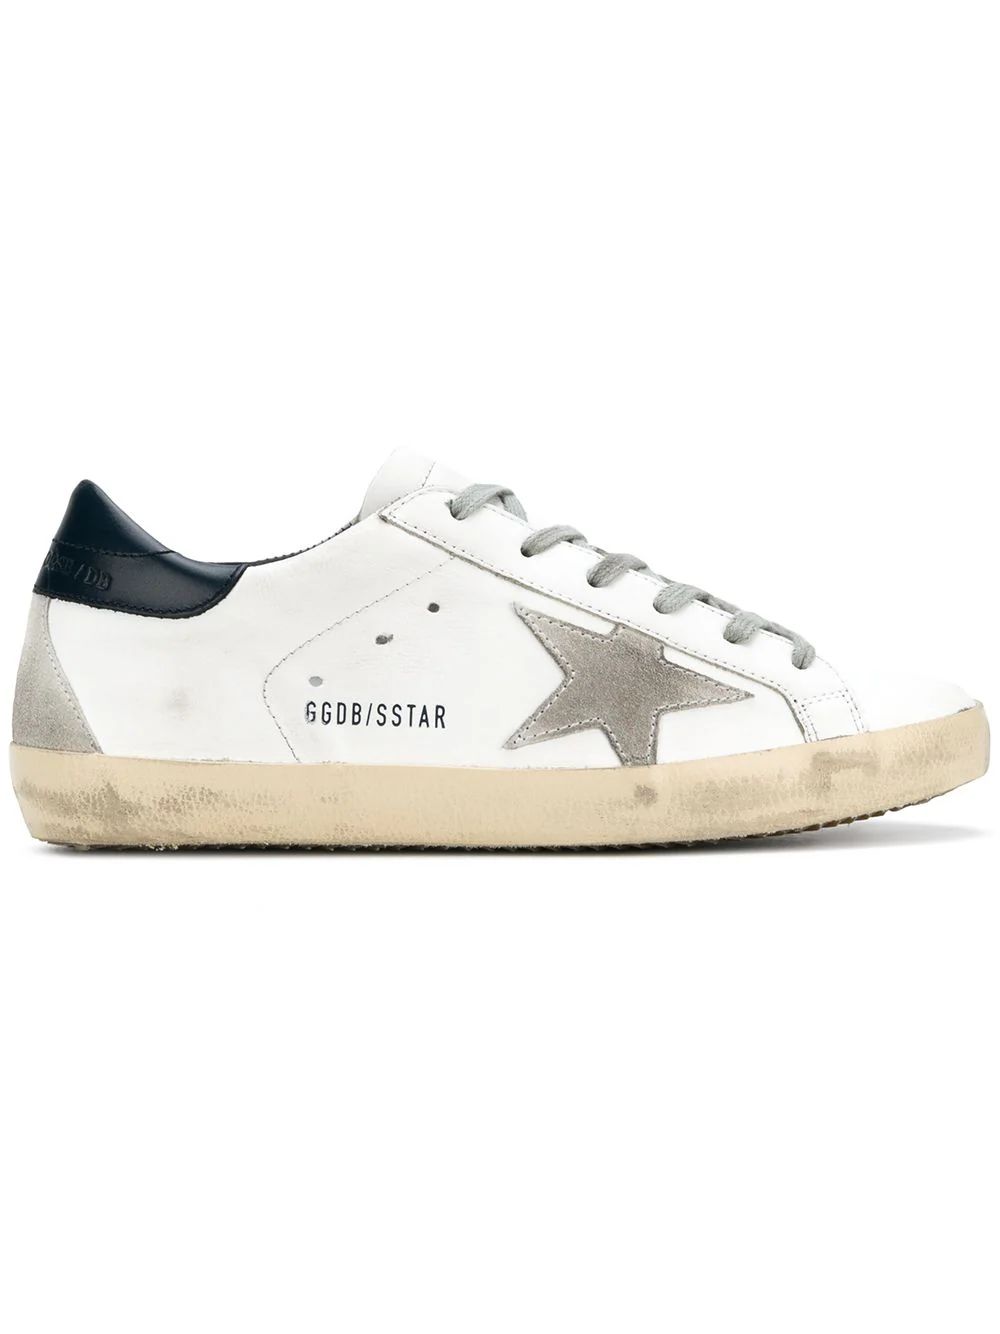 Golden Goose Deluxe Brand Superstar sneakers - White | FarFetch Global